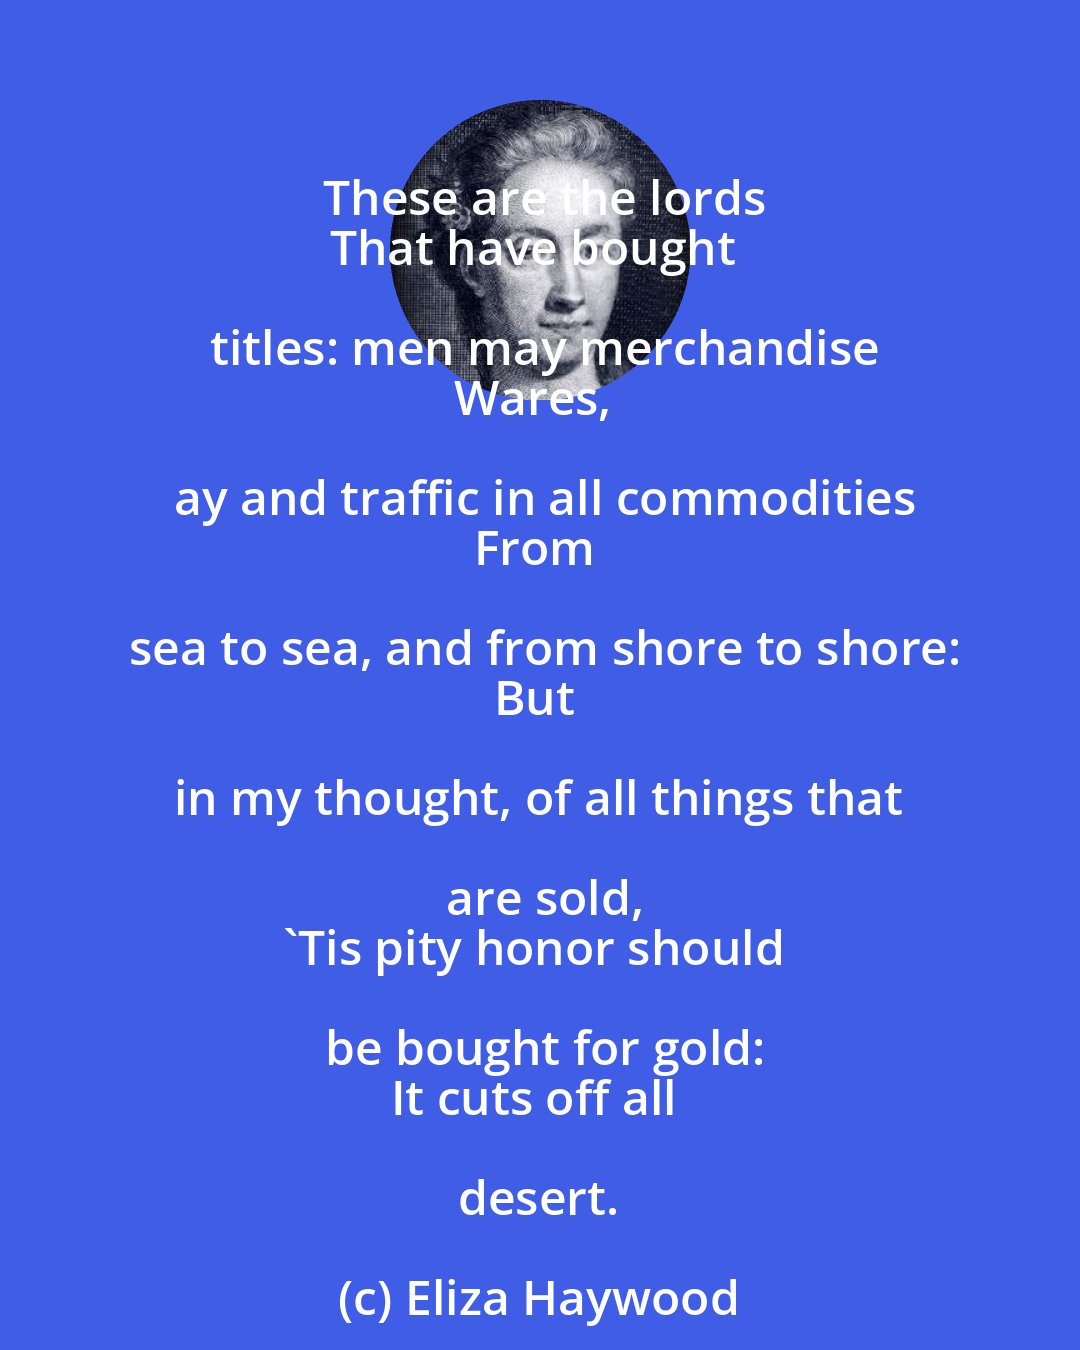 Eliza Haywood: These are the lords
That have bought titles: men may merchandise
Wares, ay and traffic in all commodities
From sea to sea, and from shore to shore:
But in my thought, of all things that are sold,
'Tis pity honor should be bought for gold:
It cuts off all desert.